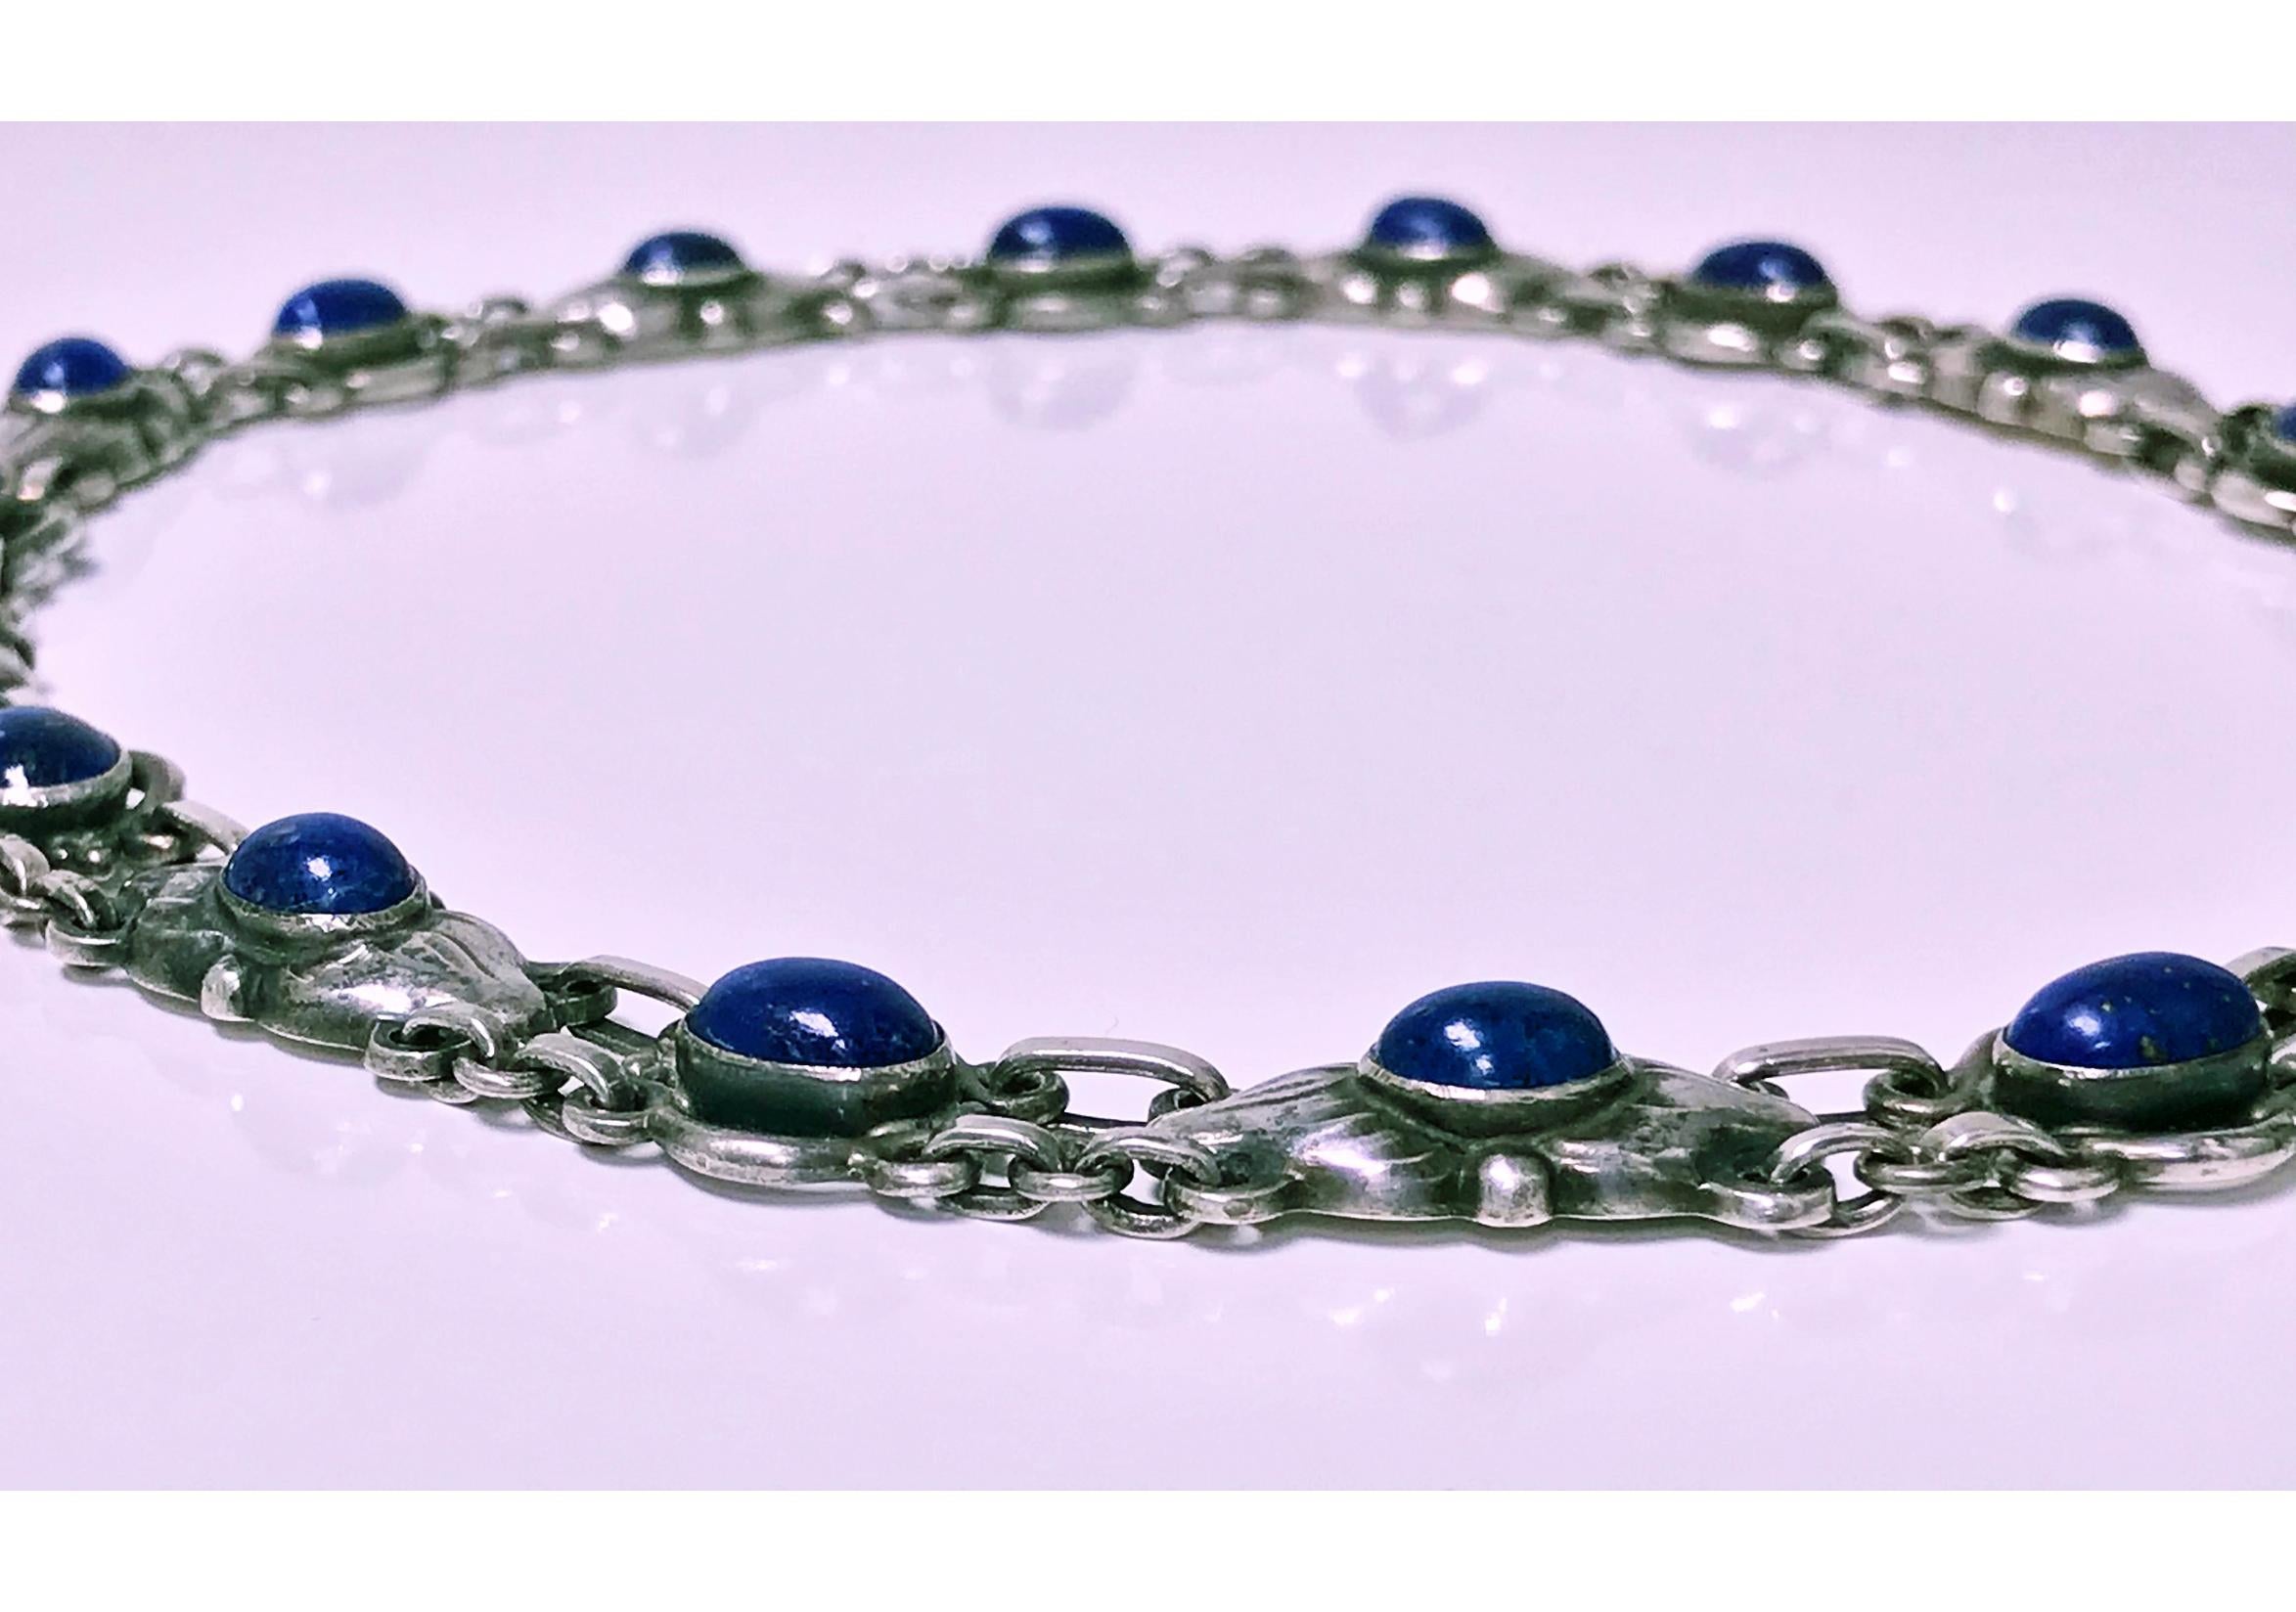 Georg Jensen Lapis and Sterling Silver Necklace, design No 57, C.1930. Bezel set oval lapis with stylised leaves. Full Jensen marks and GI marks to reverse. Design featured in Georg Jensen Jewelry, Isabelle Anscombe, edited by David A. Taylor. Yale